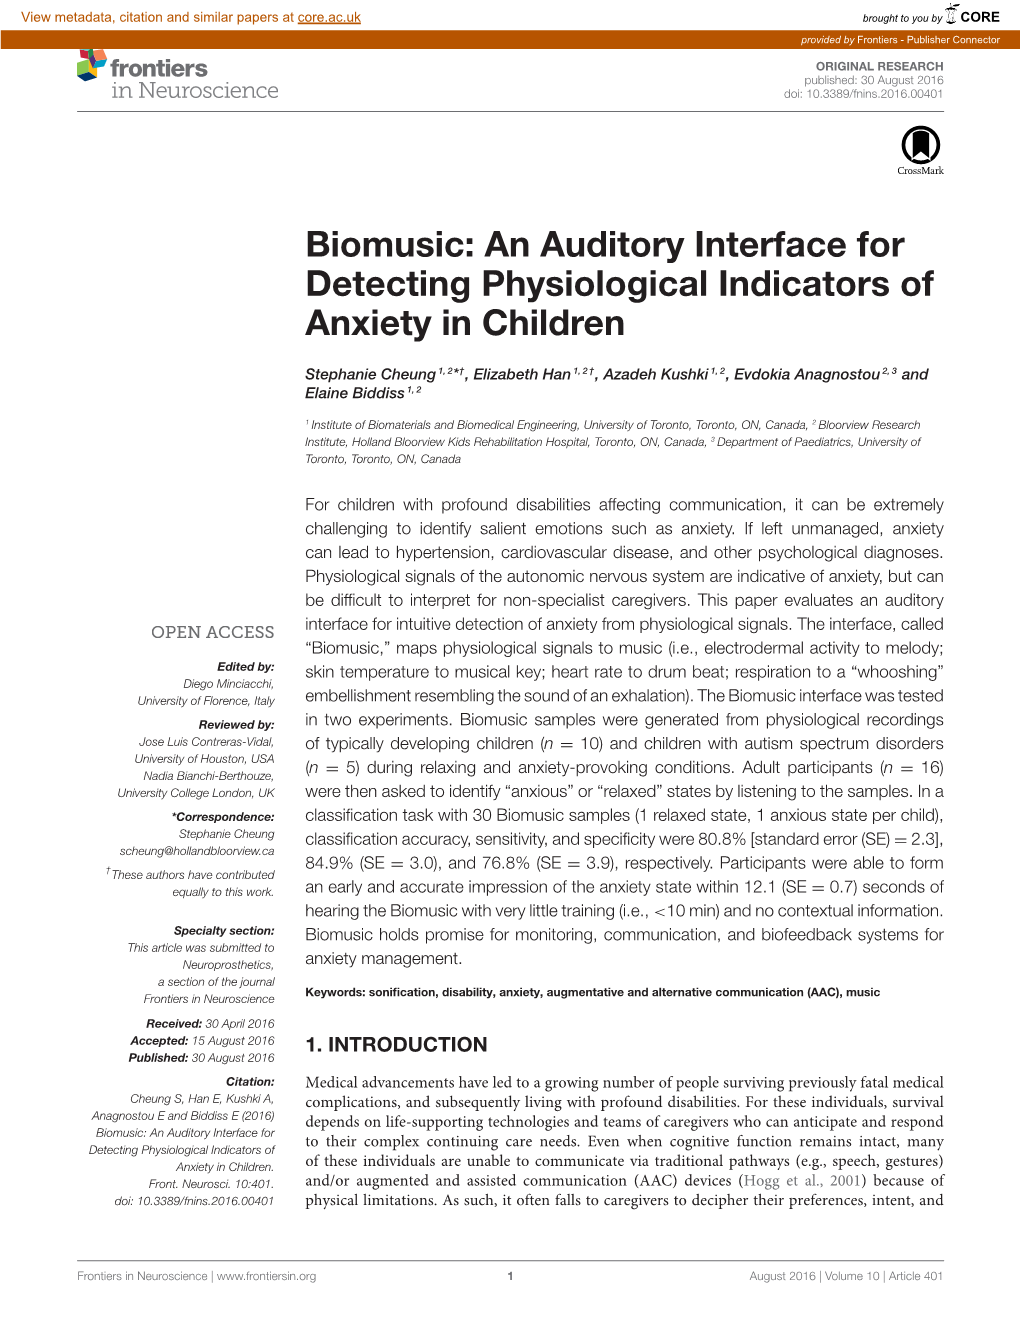 Biomusic: an Auditory Interface for Detecting Physiological Indicators of Anxiety in Children